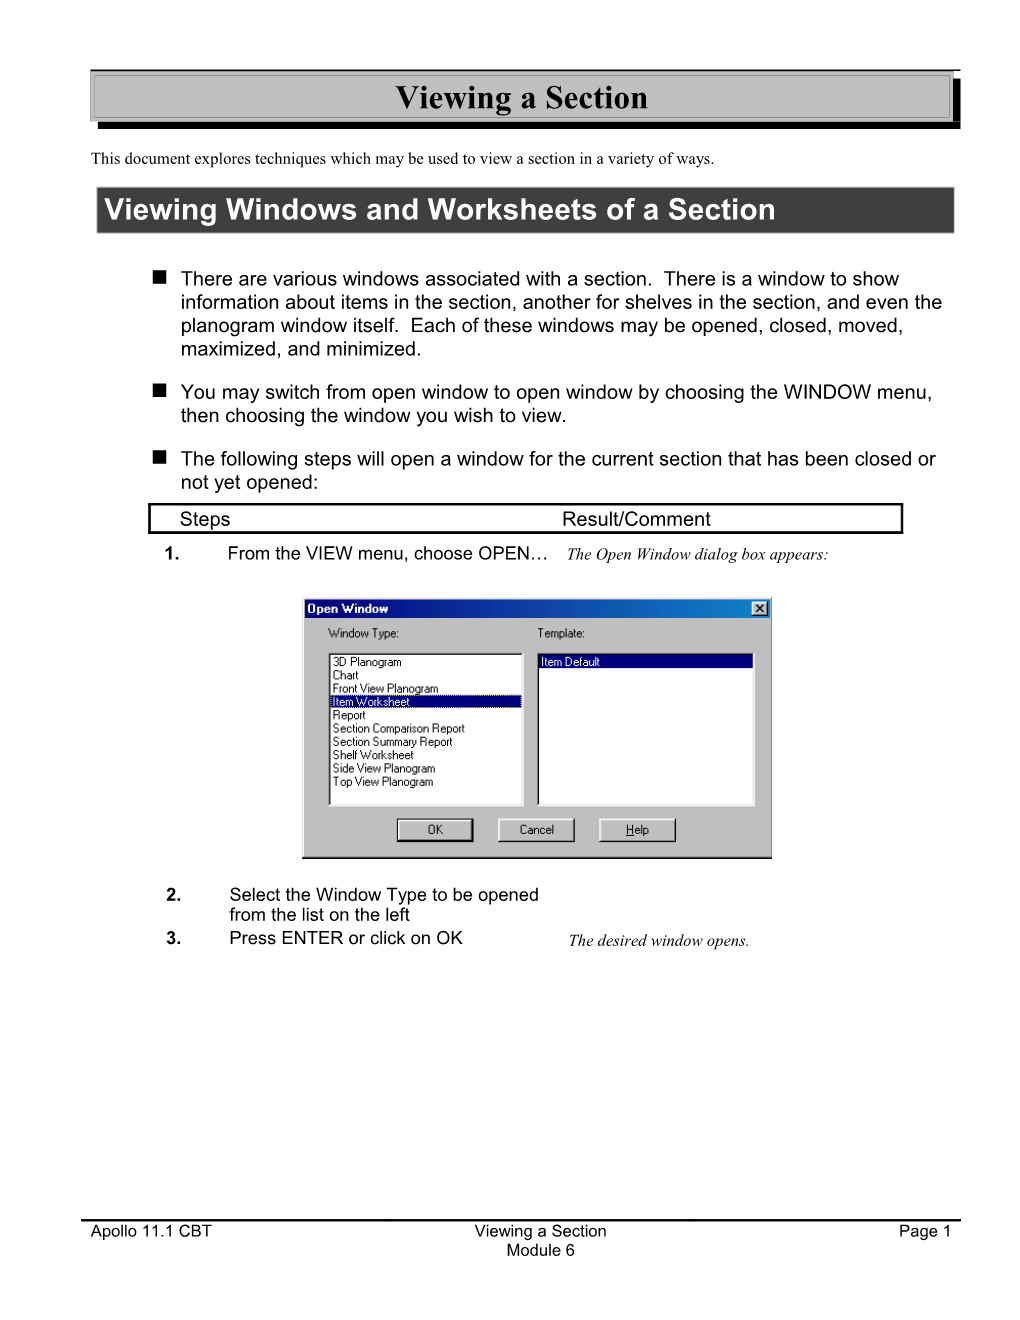 Viewing Windows and Worksheets of a Section